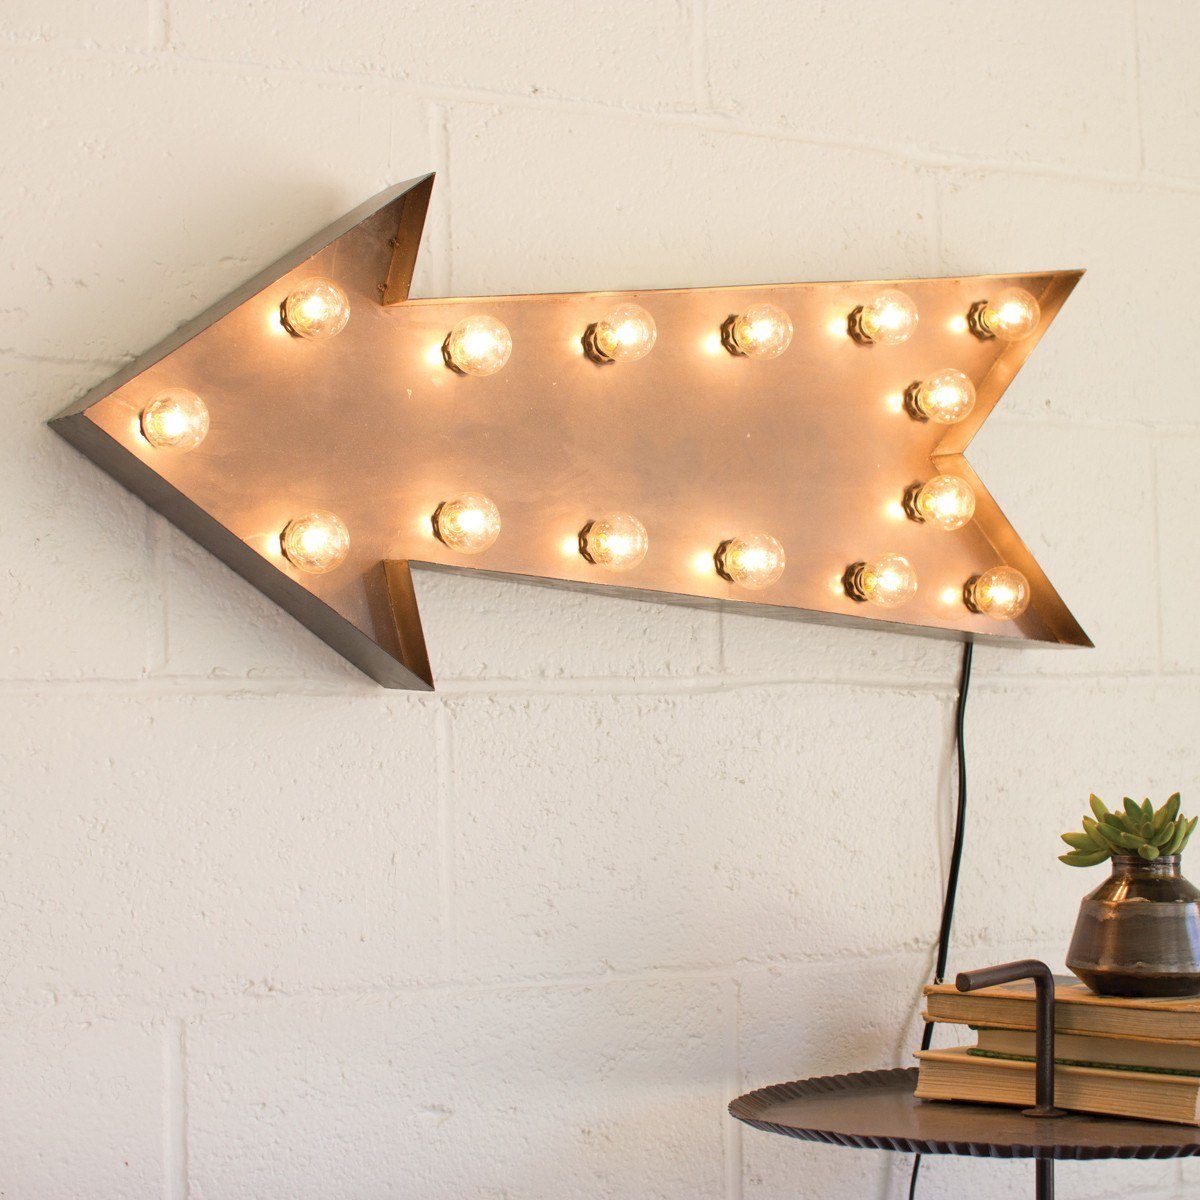 36” Large Arrow The Buy Sign - Marquee Lights Marquee (Rustic) Vintage Online Rusty Lights with - Marquee